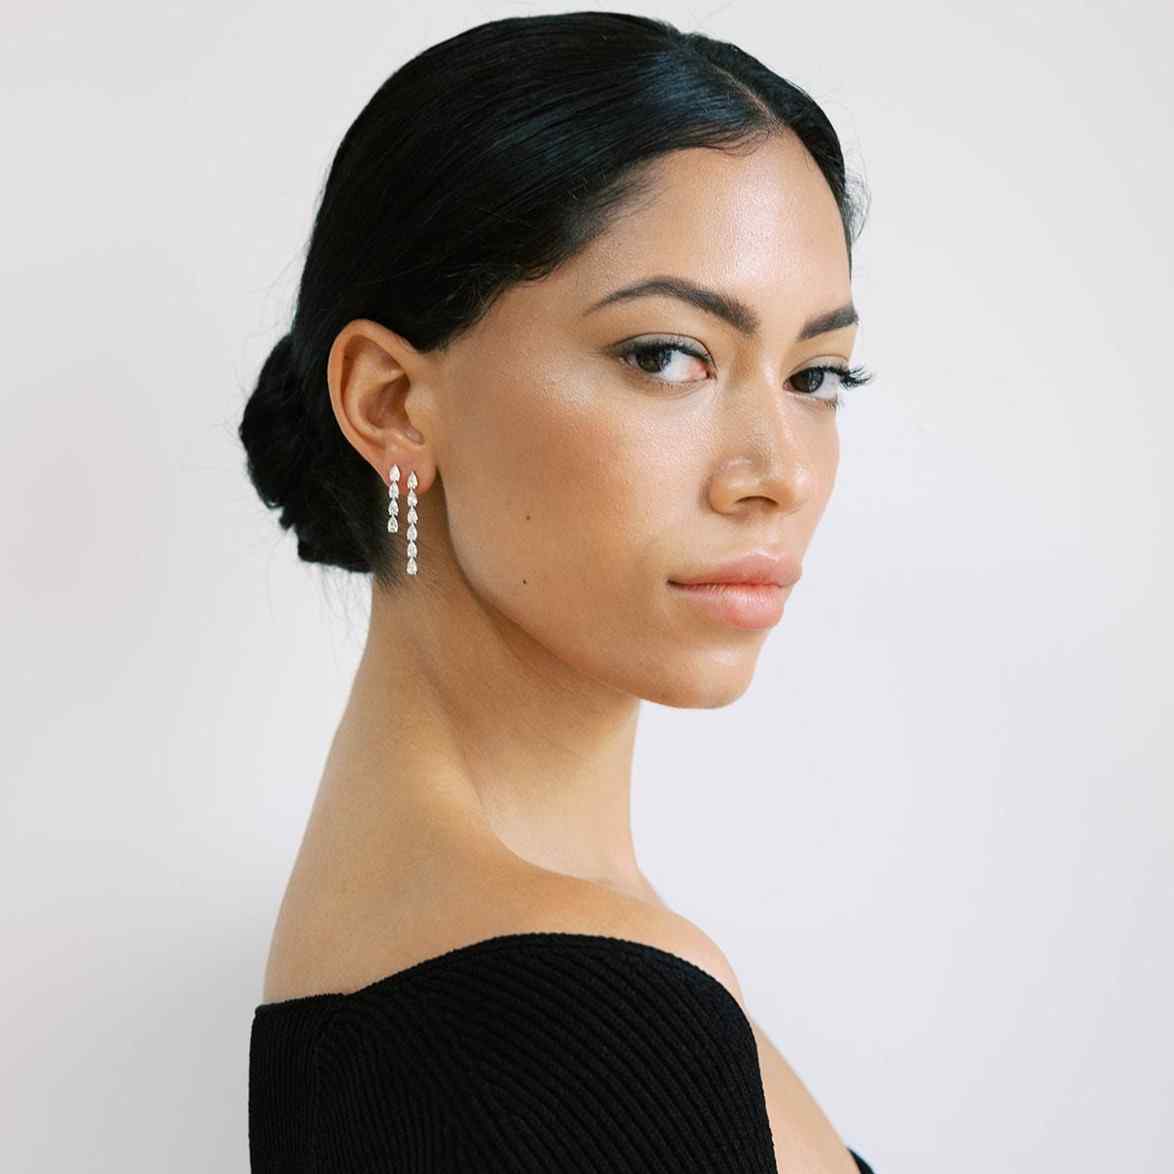 A model wears the Île Column Earring stack - featured on countless Red Carpets globally. The Grande and Petite earrings sit next to each other on the same ear - the most striking earring stack. Both are made with lab-grown, D color, IF/VVS diamonds.